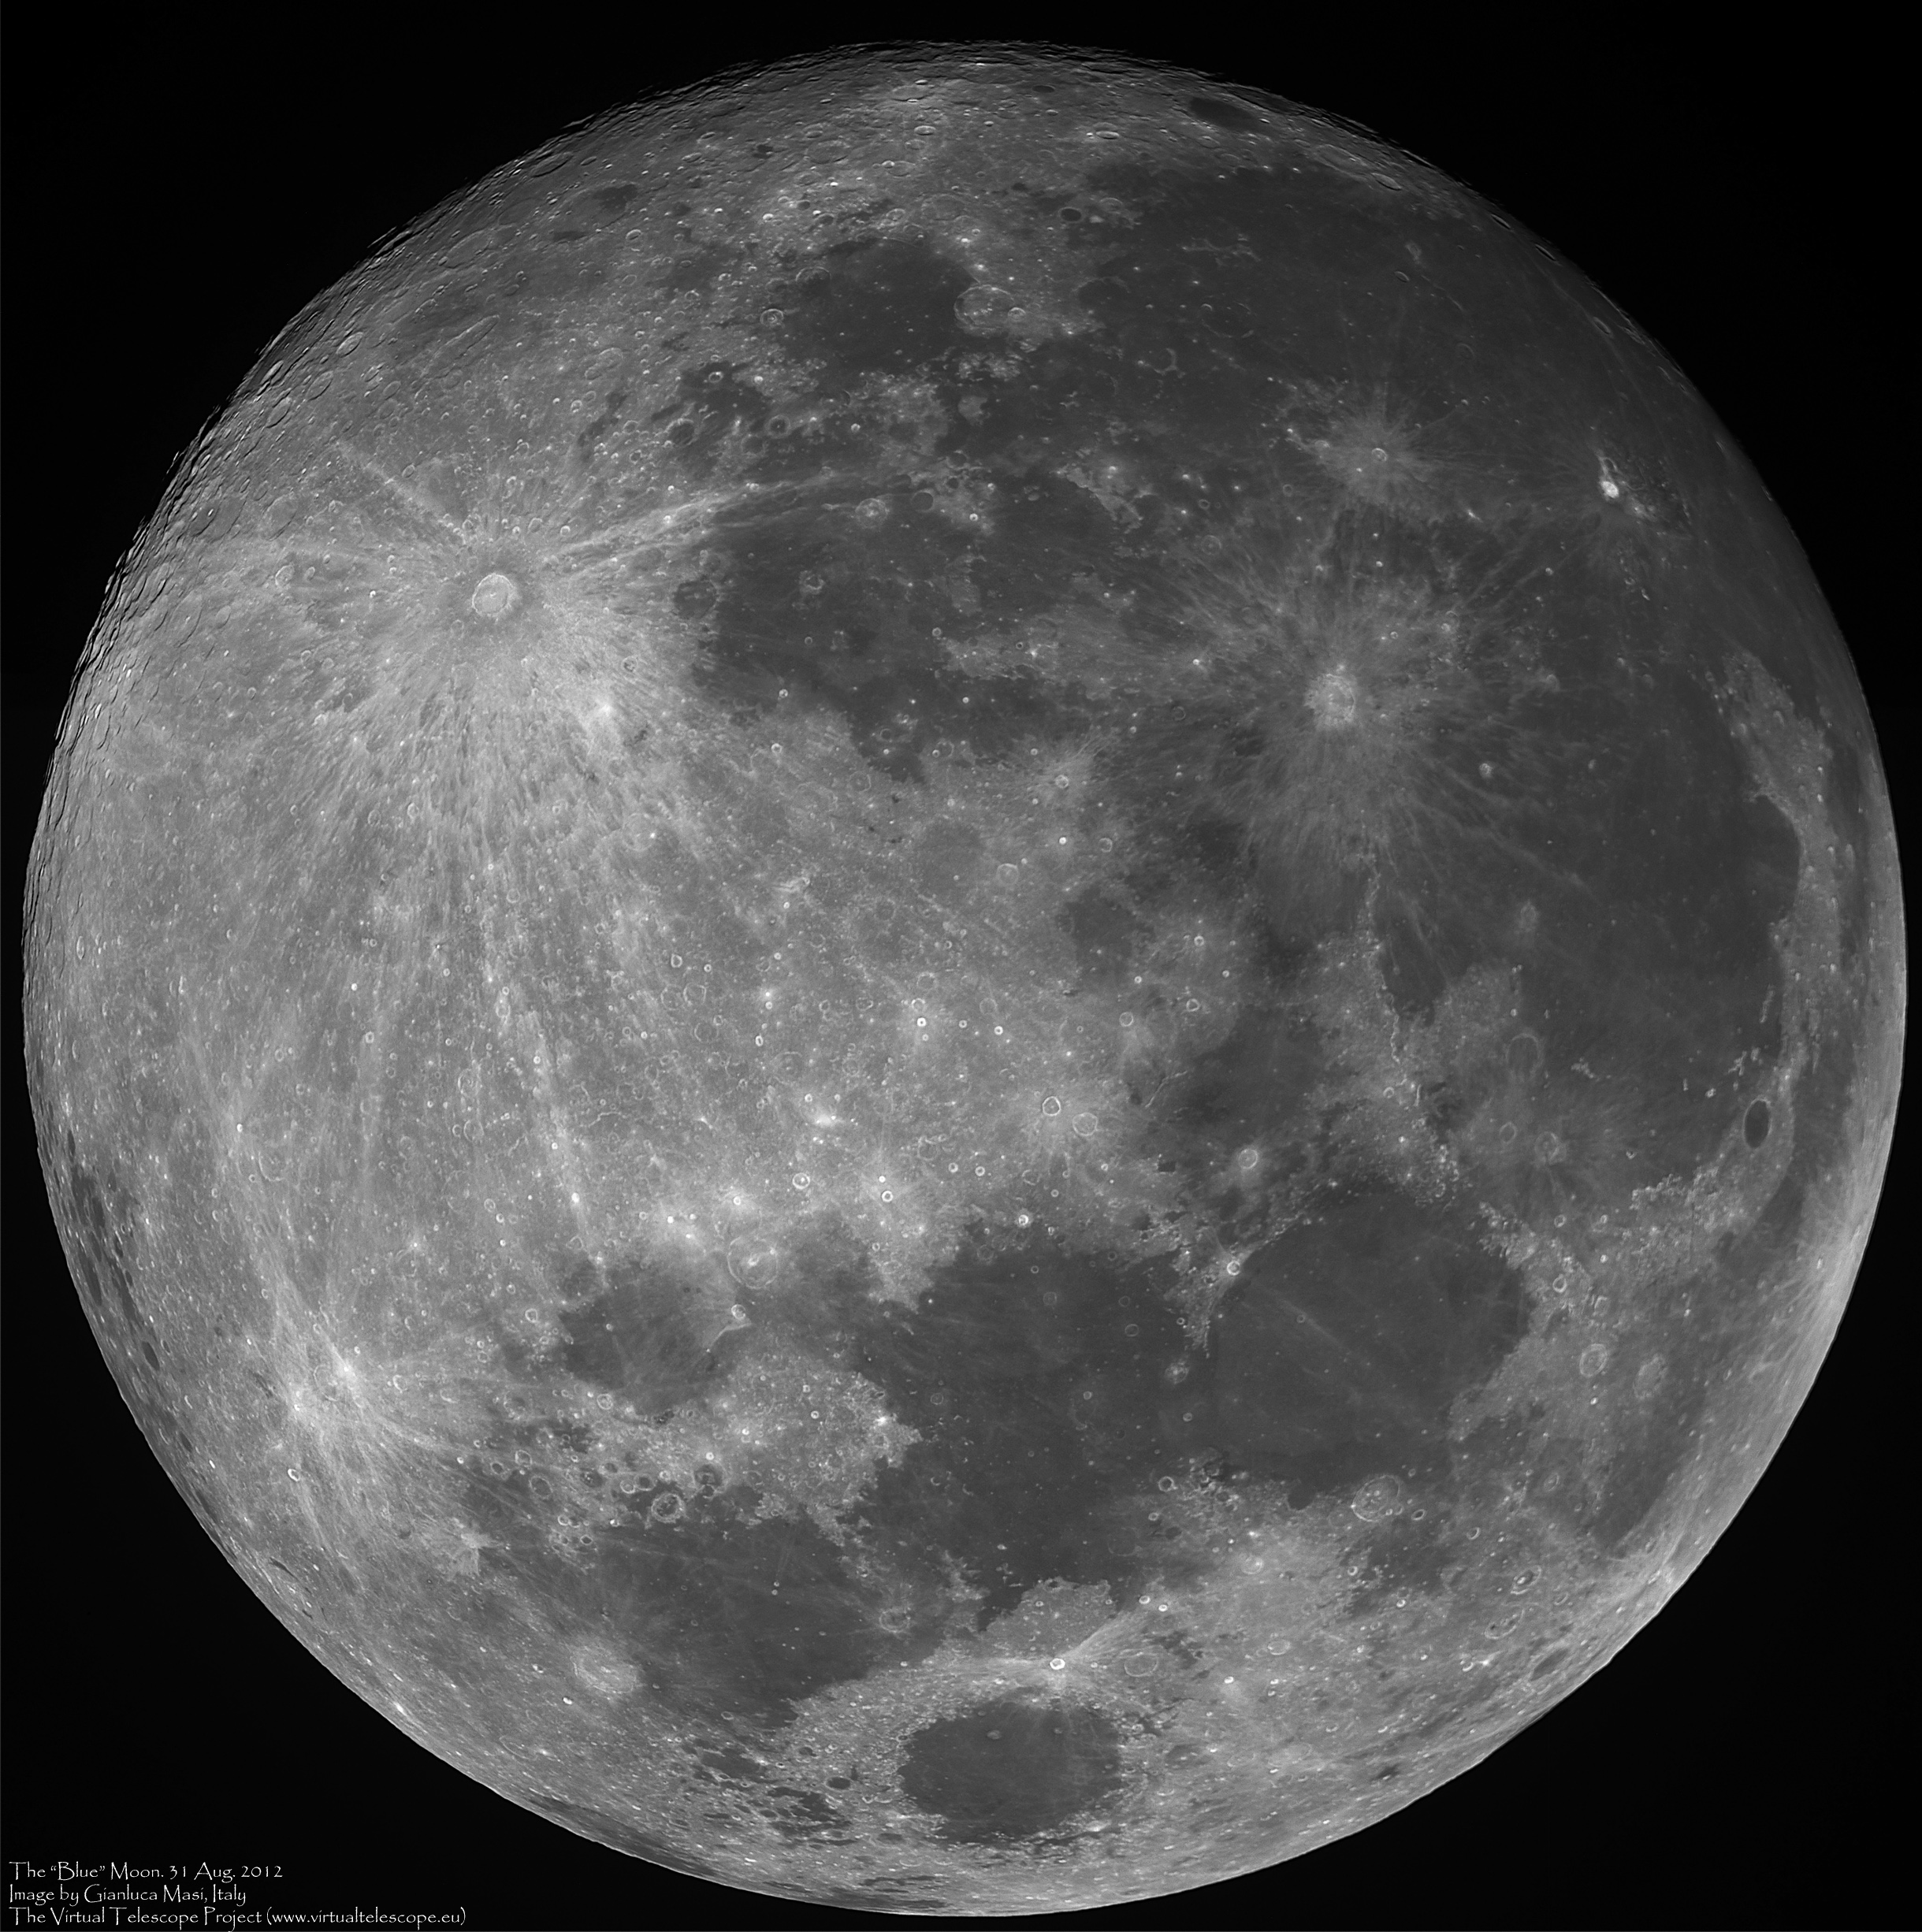 The "Blue" Moon 31 Aug. 2012 The Virtual Telescope Project 2.0